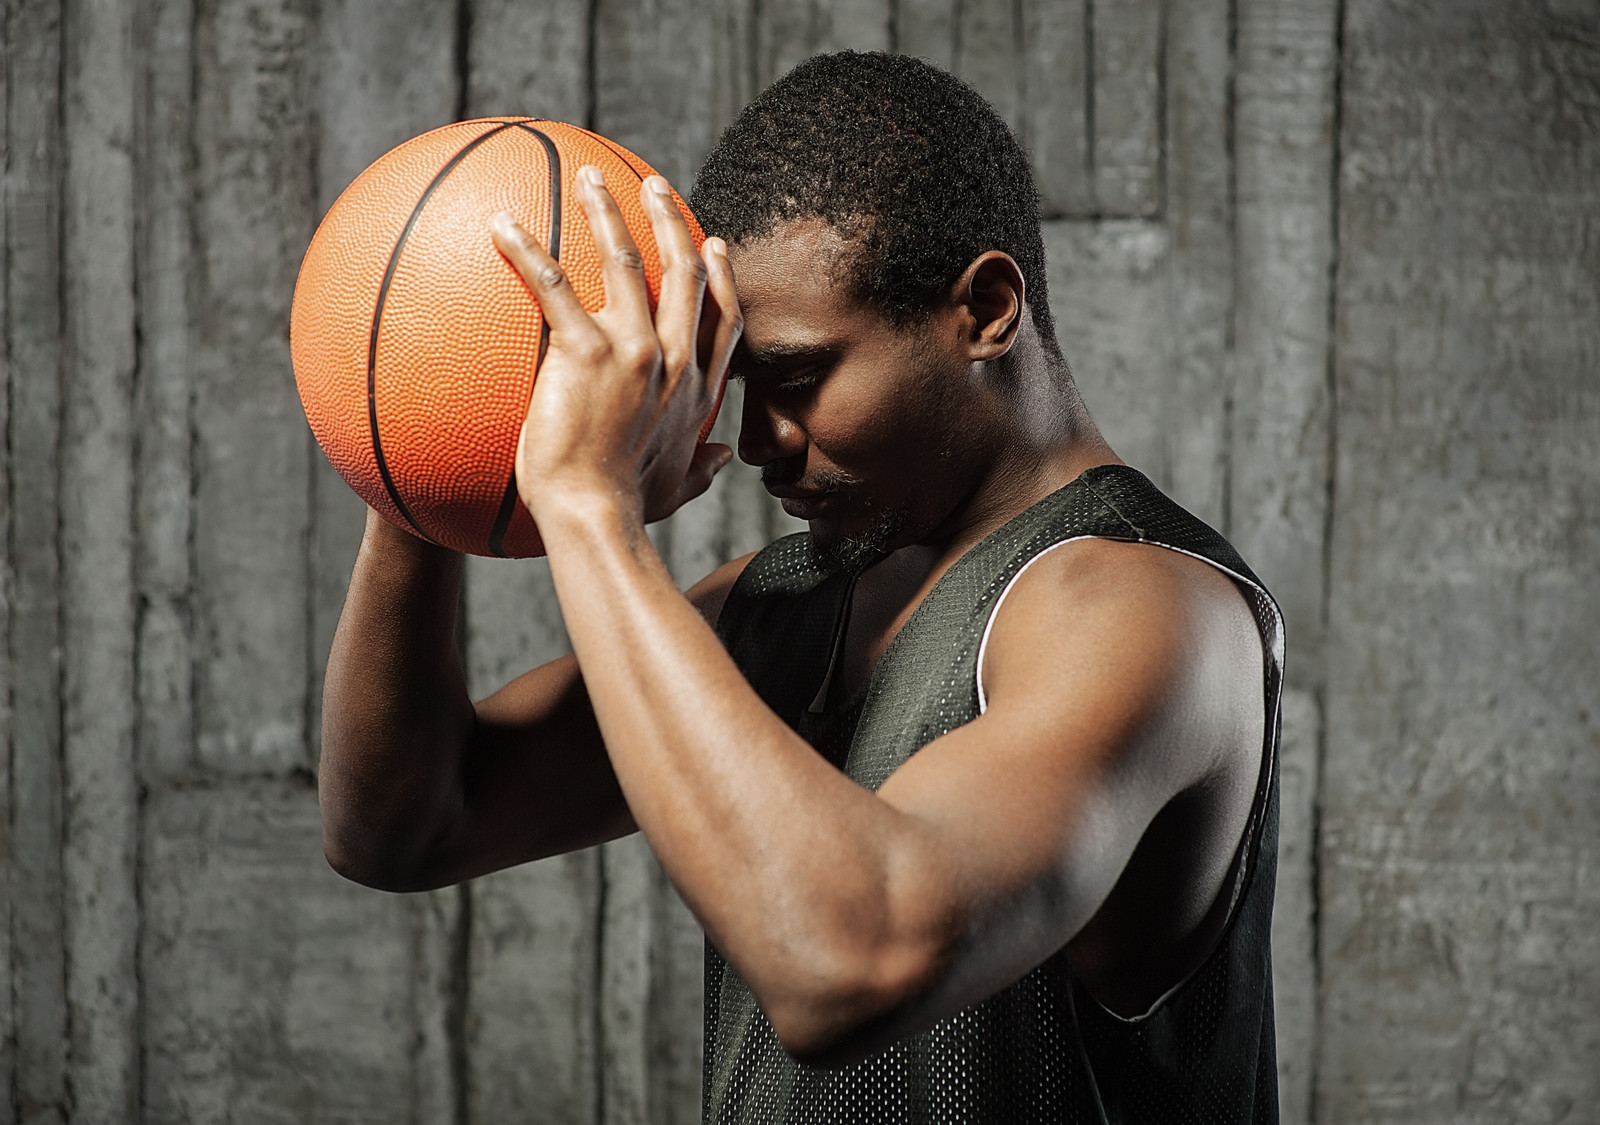 Basketball player thinking before a shot.